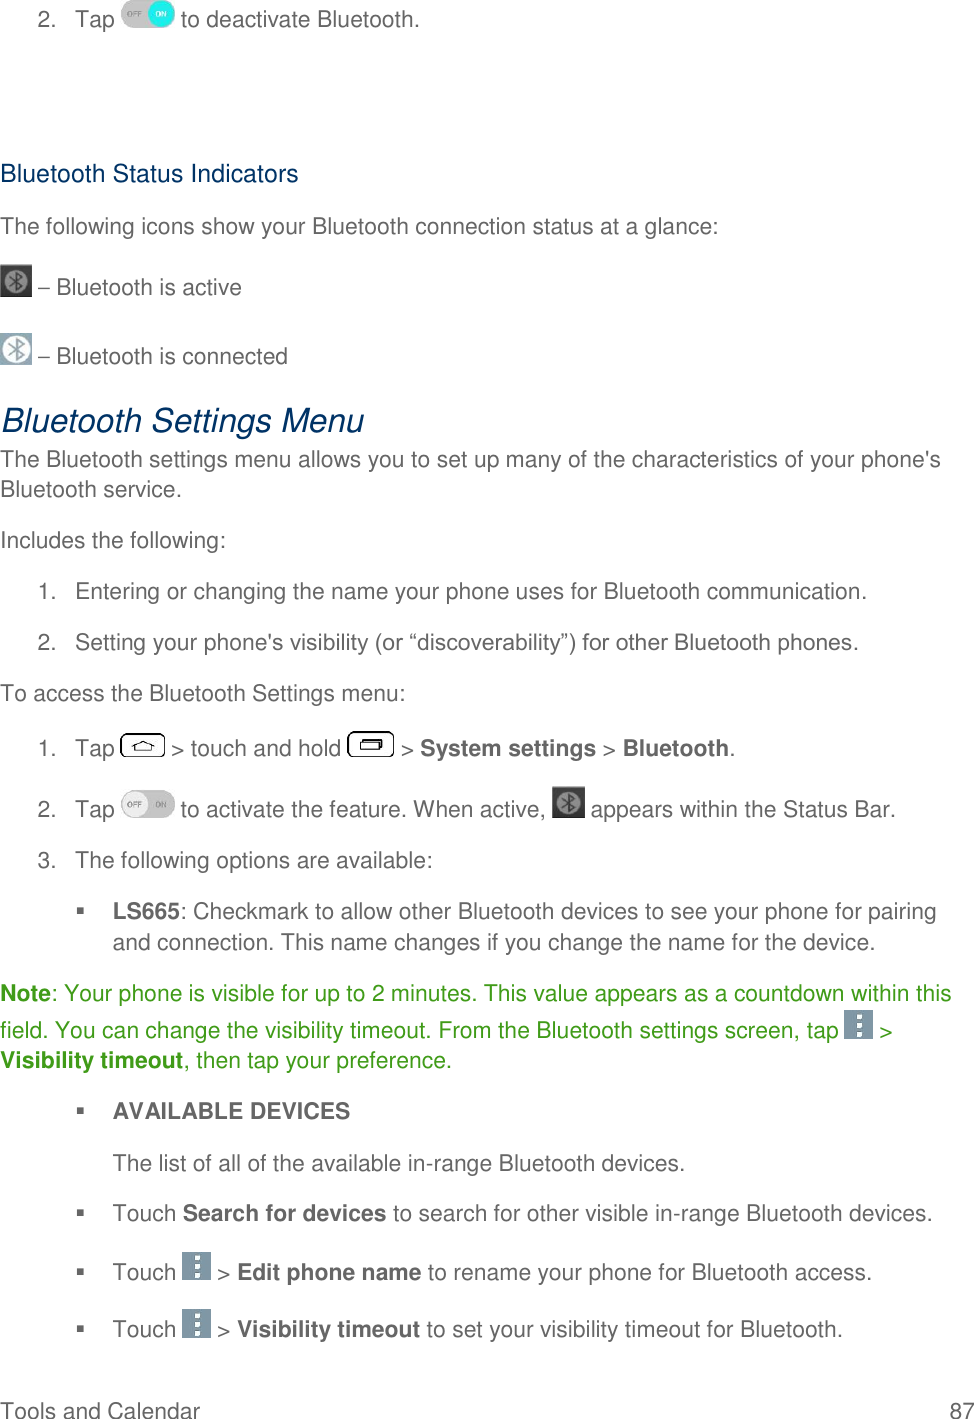  Tools and Calendar  87 2.  Tap   to deactivate Bluetooth.   Bluetooth Status Indicators The following icons show your Bluetooth connection status at a glance:  – Bluetooth is active  – Bluetooth is connected Bluetooth Settings Menu The Bluetooth settings menu allows you to set up many of the characteristics of your phone&apos;s Bluetooth service. Includes the following: 1.  Entering or changing the name your phone uses for Bluetooth communication. 2. Setting your phone&apos;s visibility (or ―discoverability‖) for other Bluetooth phones. To access the Bluetooth Settings menu: 1.  Tap   &gt; touch and hold   &gt; System settings &gt; Bluetooth. 2.  Tap   to activate the feature. When active,   appears within the Status Bar. 3.  The following options are available:  LS665: Checkmark to allow other Bluetooth devices to see your phone for pairing and connection. This name changes if you change the name for the device. Note: Your phone is visible for up to 2 minutes. This value appears as a countdown within this field. You can change the visibility timeout. From the Bluetooth settings screen, tap   &gt; Visibility timeout, then tap your preference.  AVAILABLE DEVICES The list of all of the available in-range Bluetooth devices.   Touch Search for devices to search for other visible in-range Bluetooth devices.    Touch   &gt; Edit phone name to rename your phone for Bluetooth access.    Touch   &gt; Visibility timeout to set your visibility timeout for Bluetooth.  